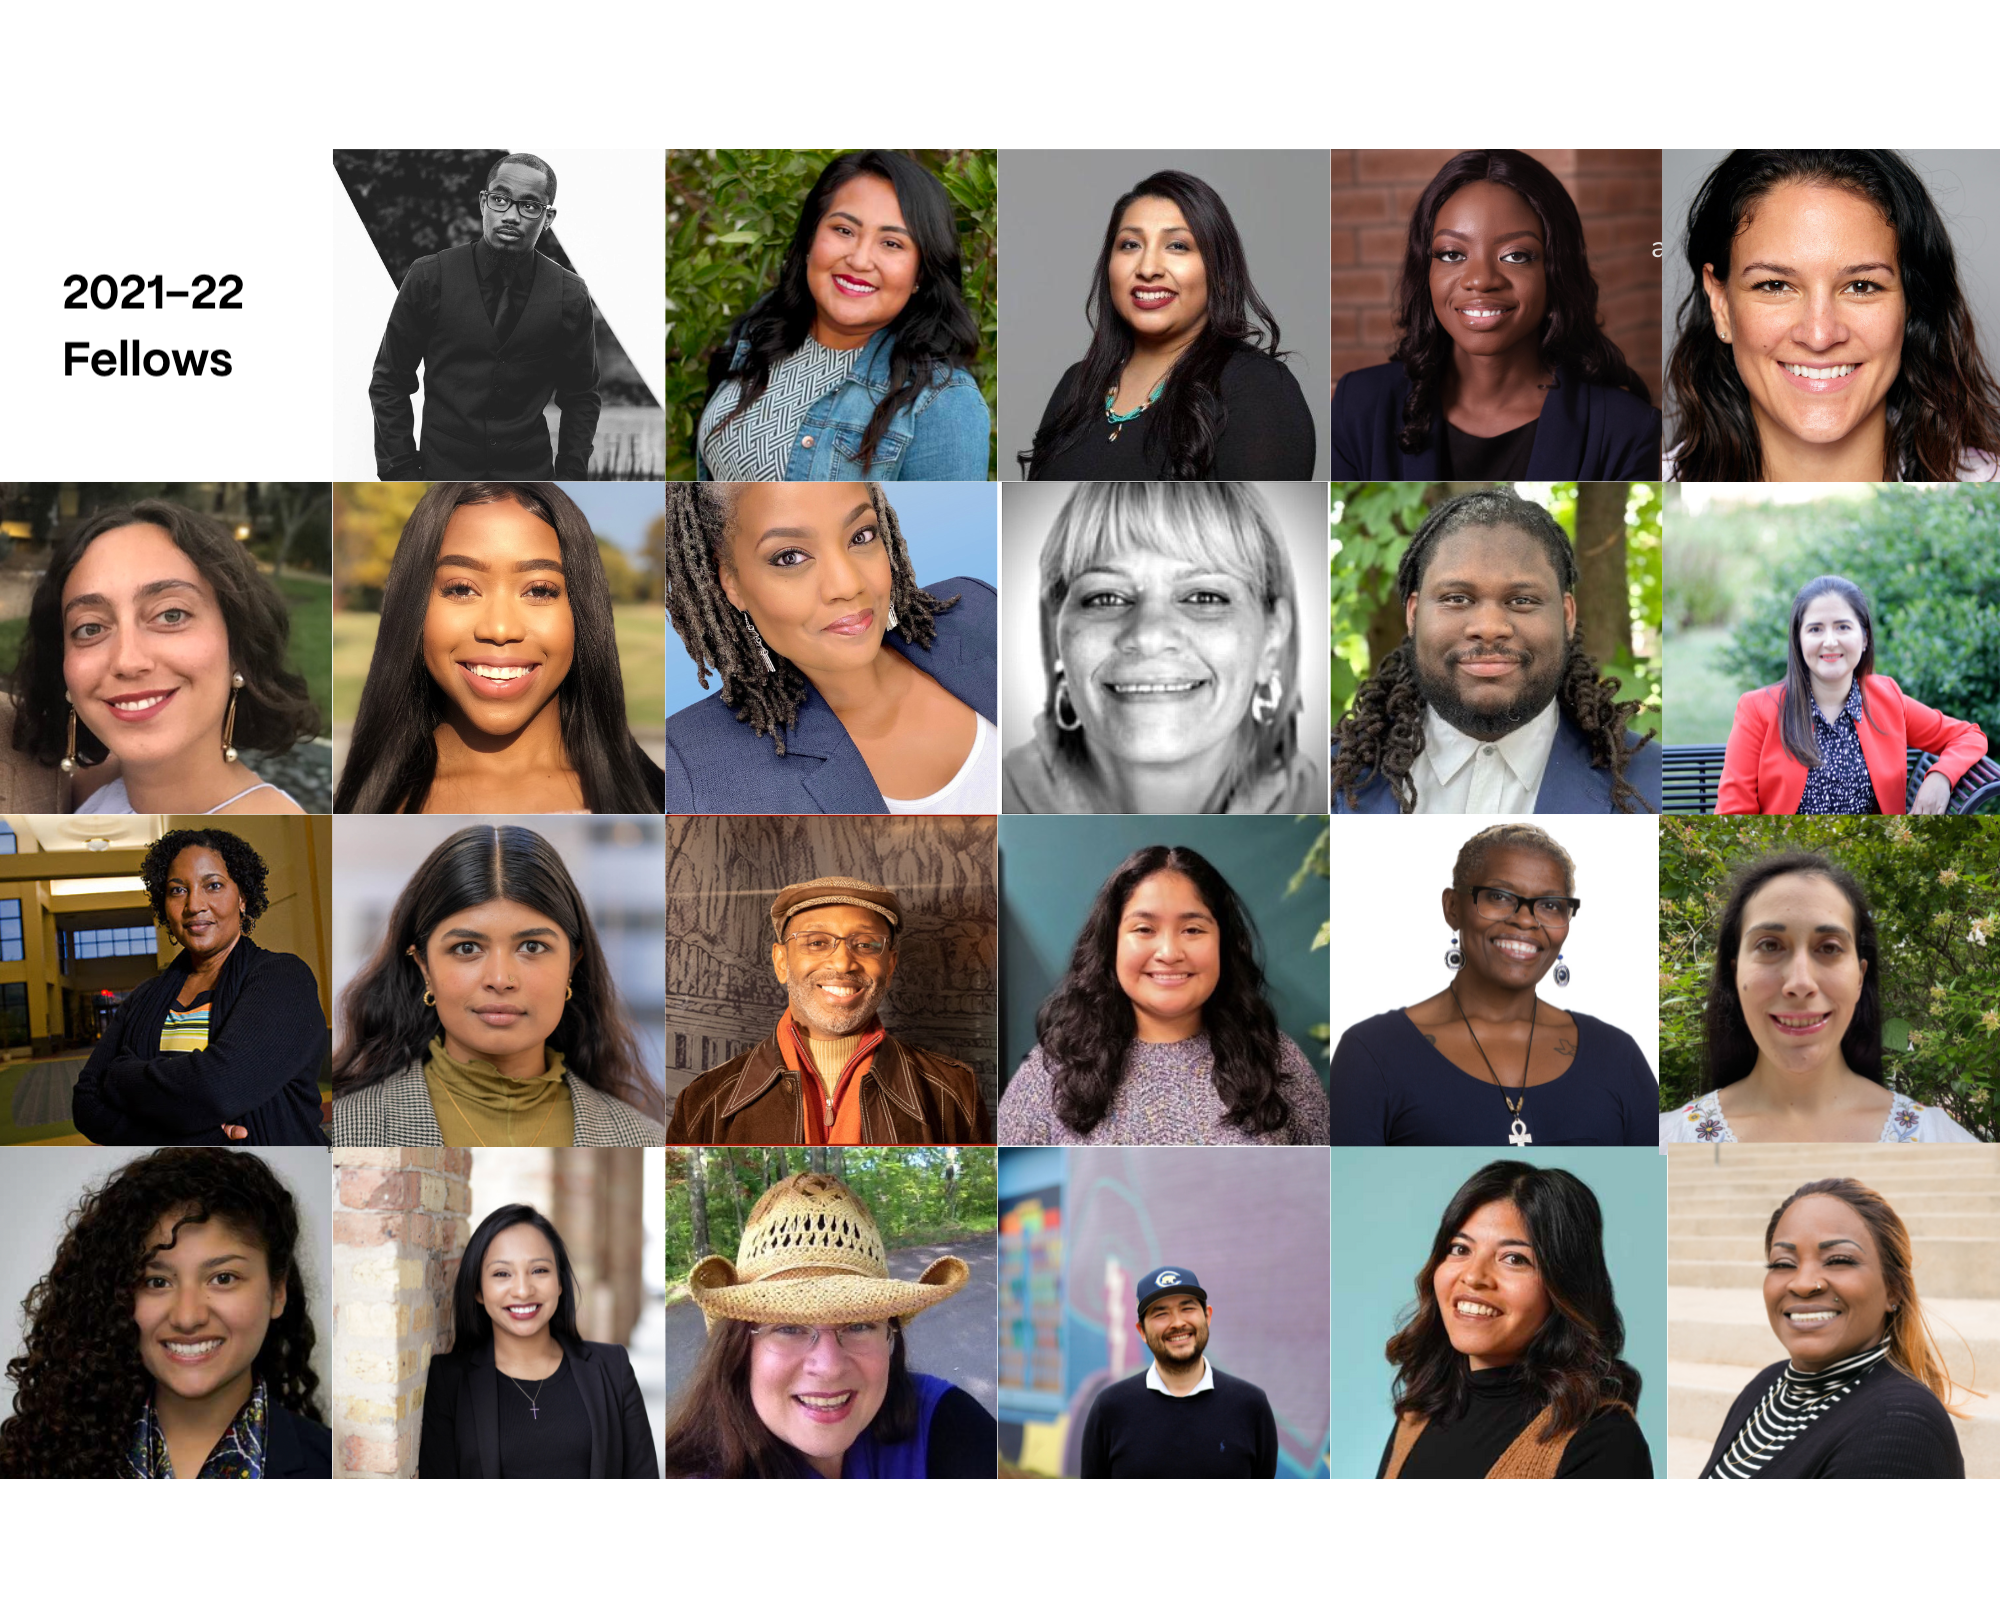 A series of portraits showing the 2021-22 cohort of the Restuccia Health Justice Fellowship